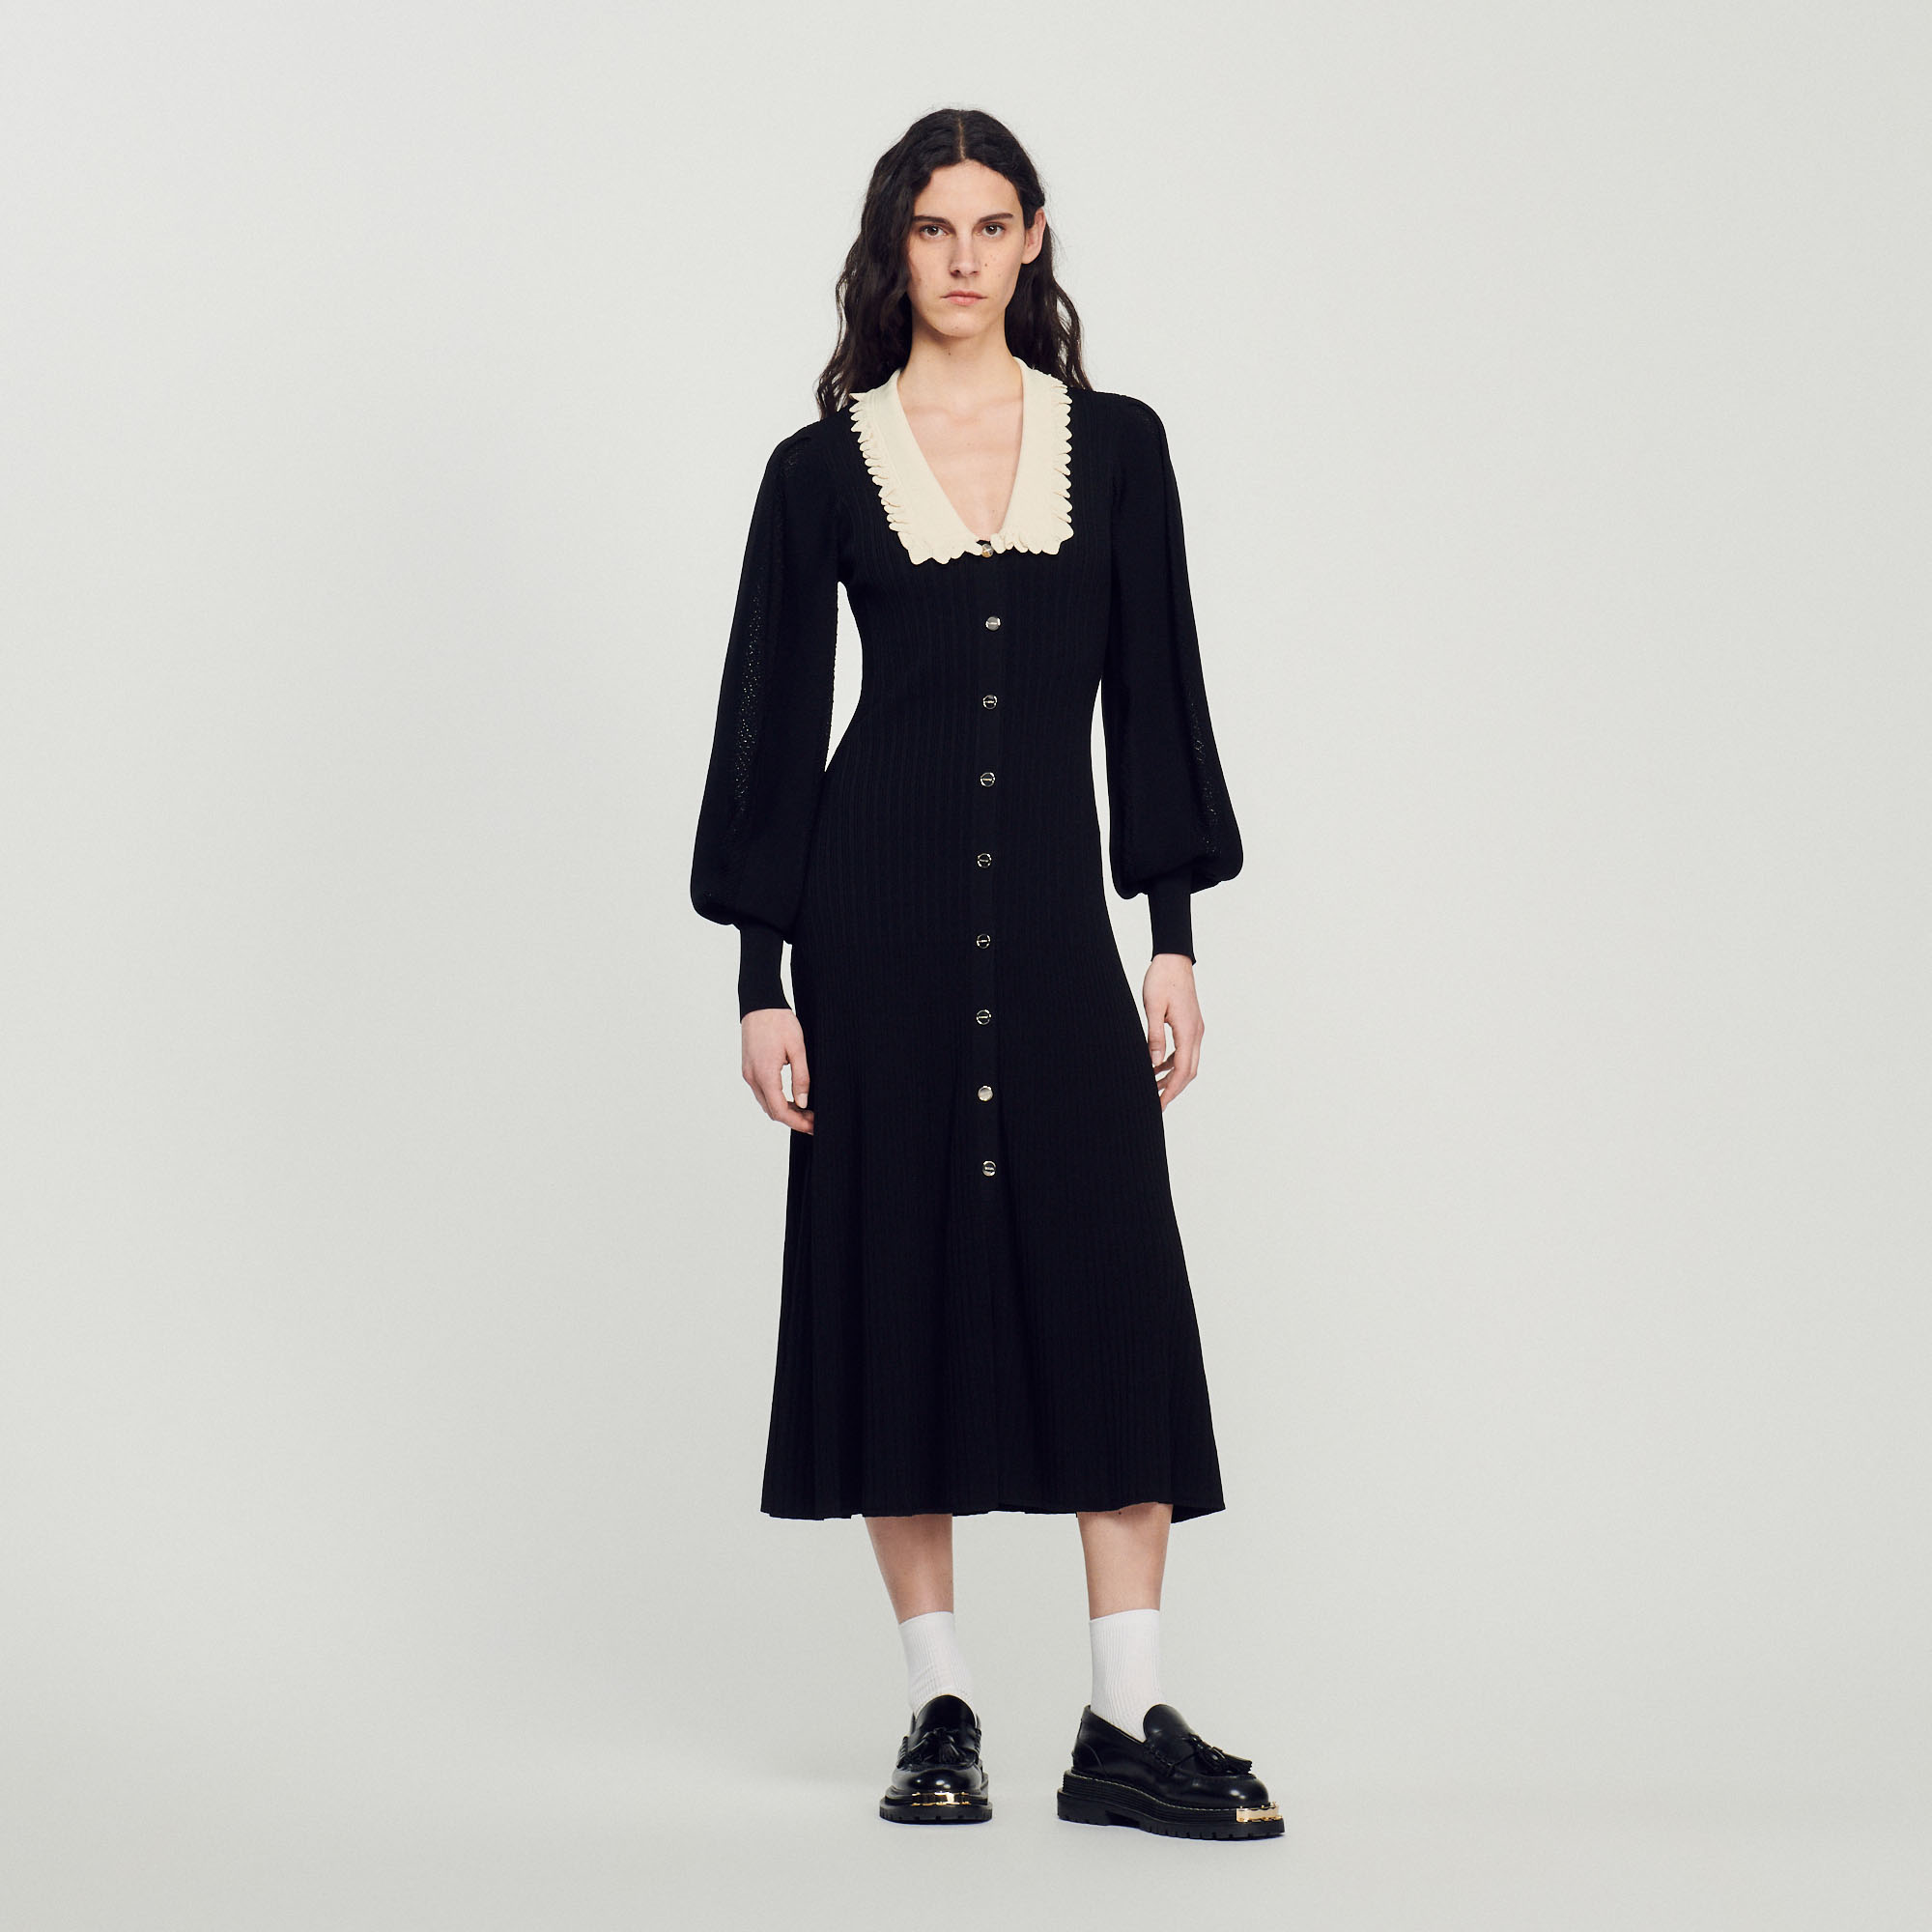 Sandro viscose Long knit button-up dress with a V-neck, large contrasting collar and long full sleeves